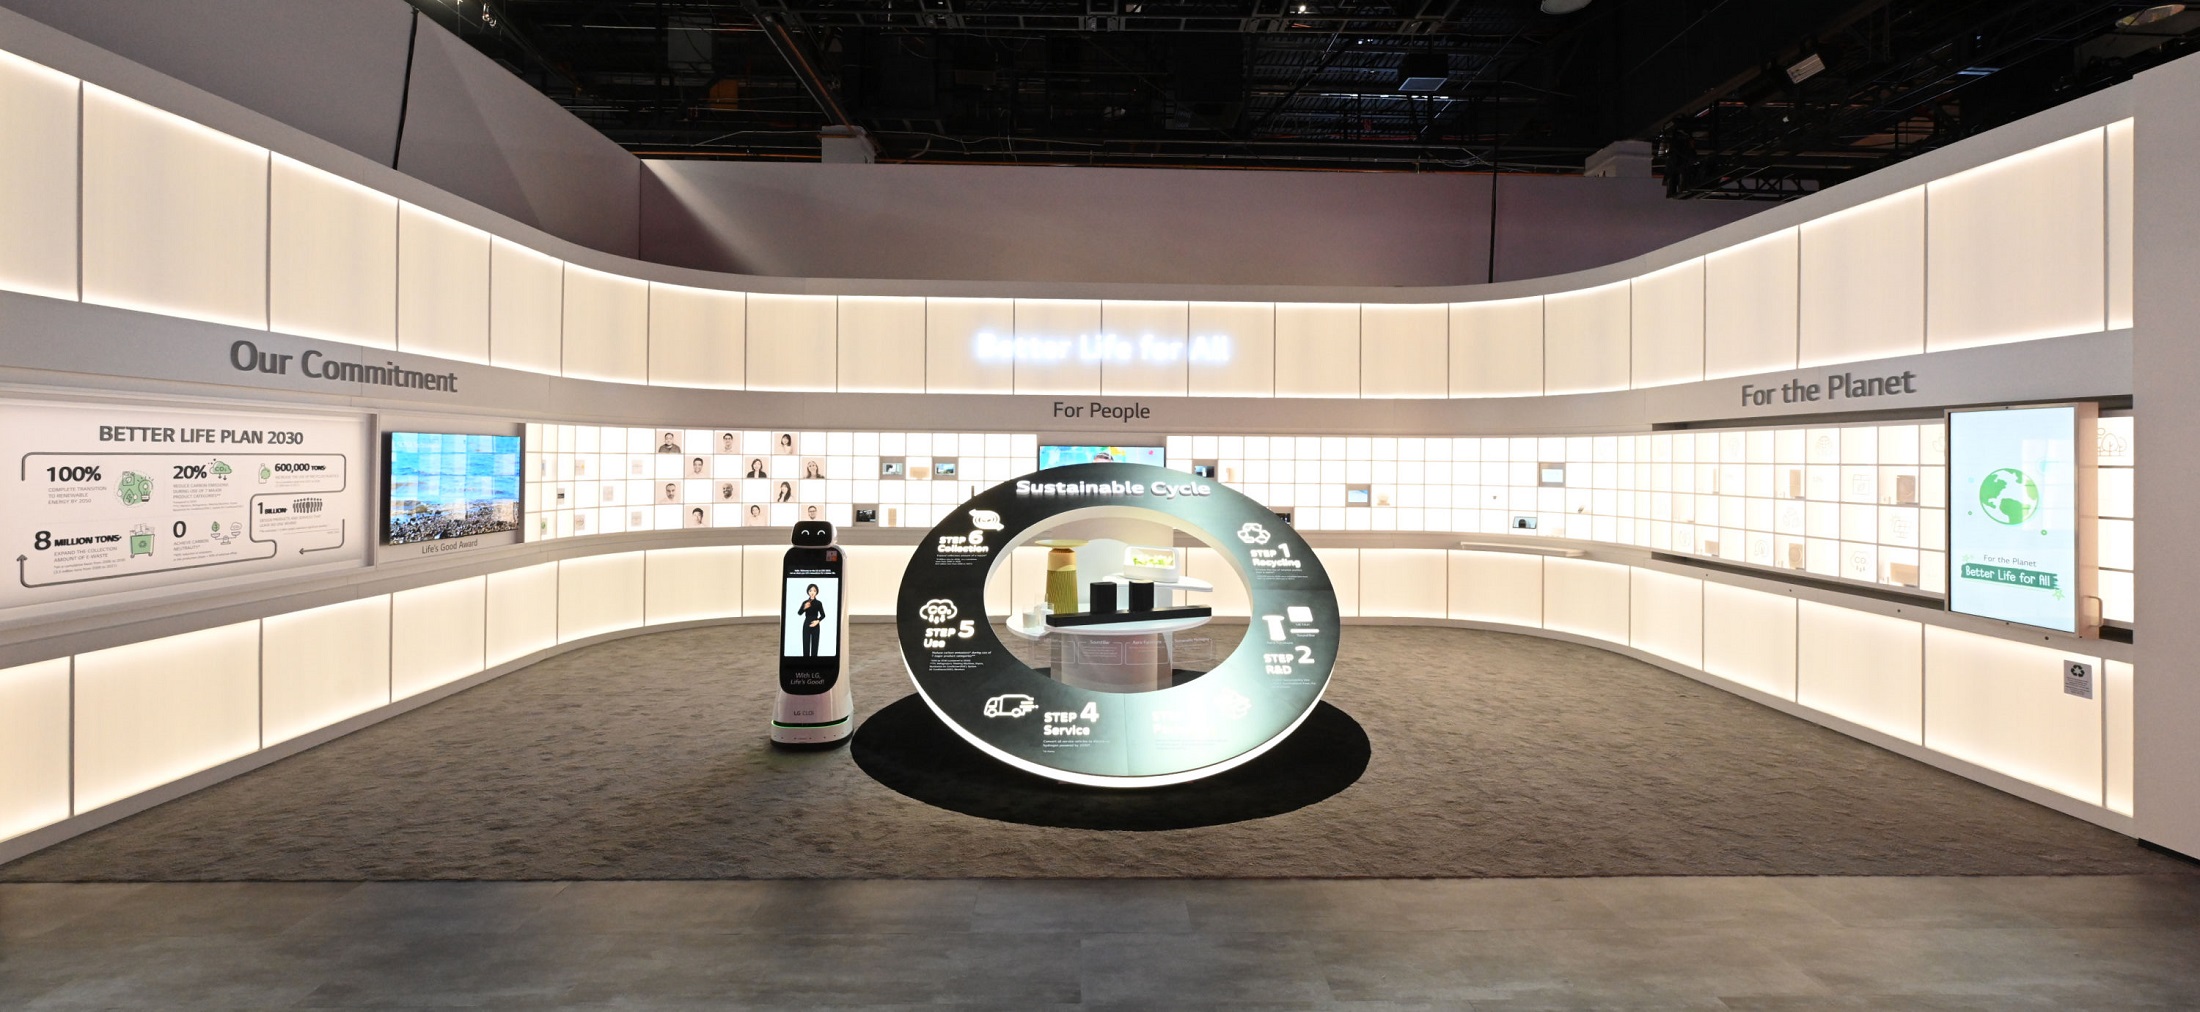 A face-on shot of the LG Better Life for All zone at CES 2023, consisting of three display sections: Our Commitment, For People, and For the Planet. (from left to right)